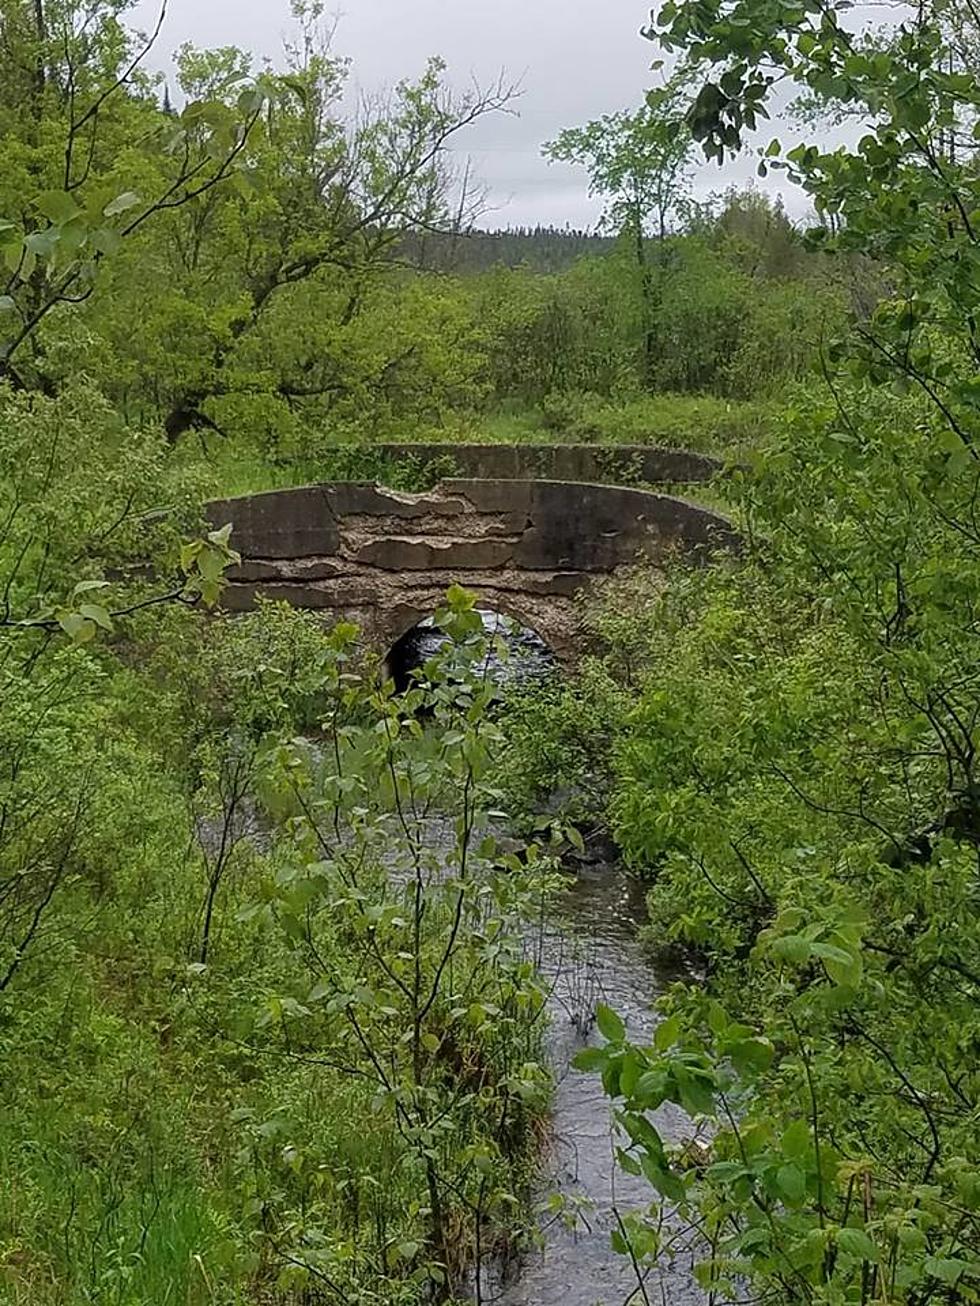 This Abandoned Bridge Was Once a Vital Link Across Michigan's UP